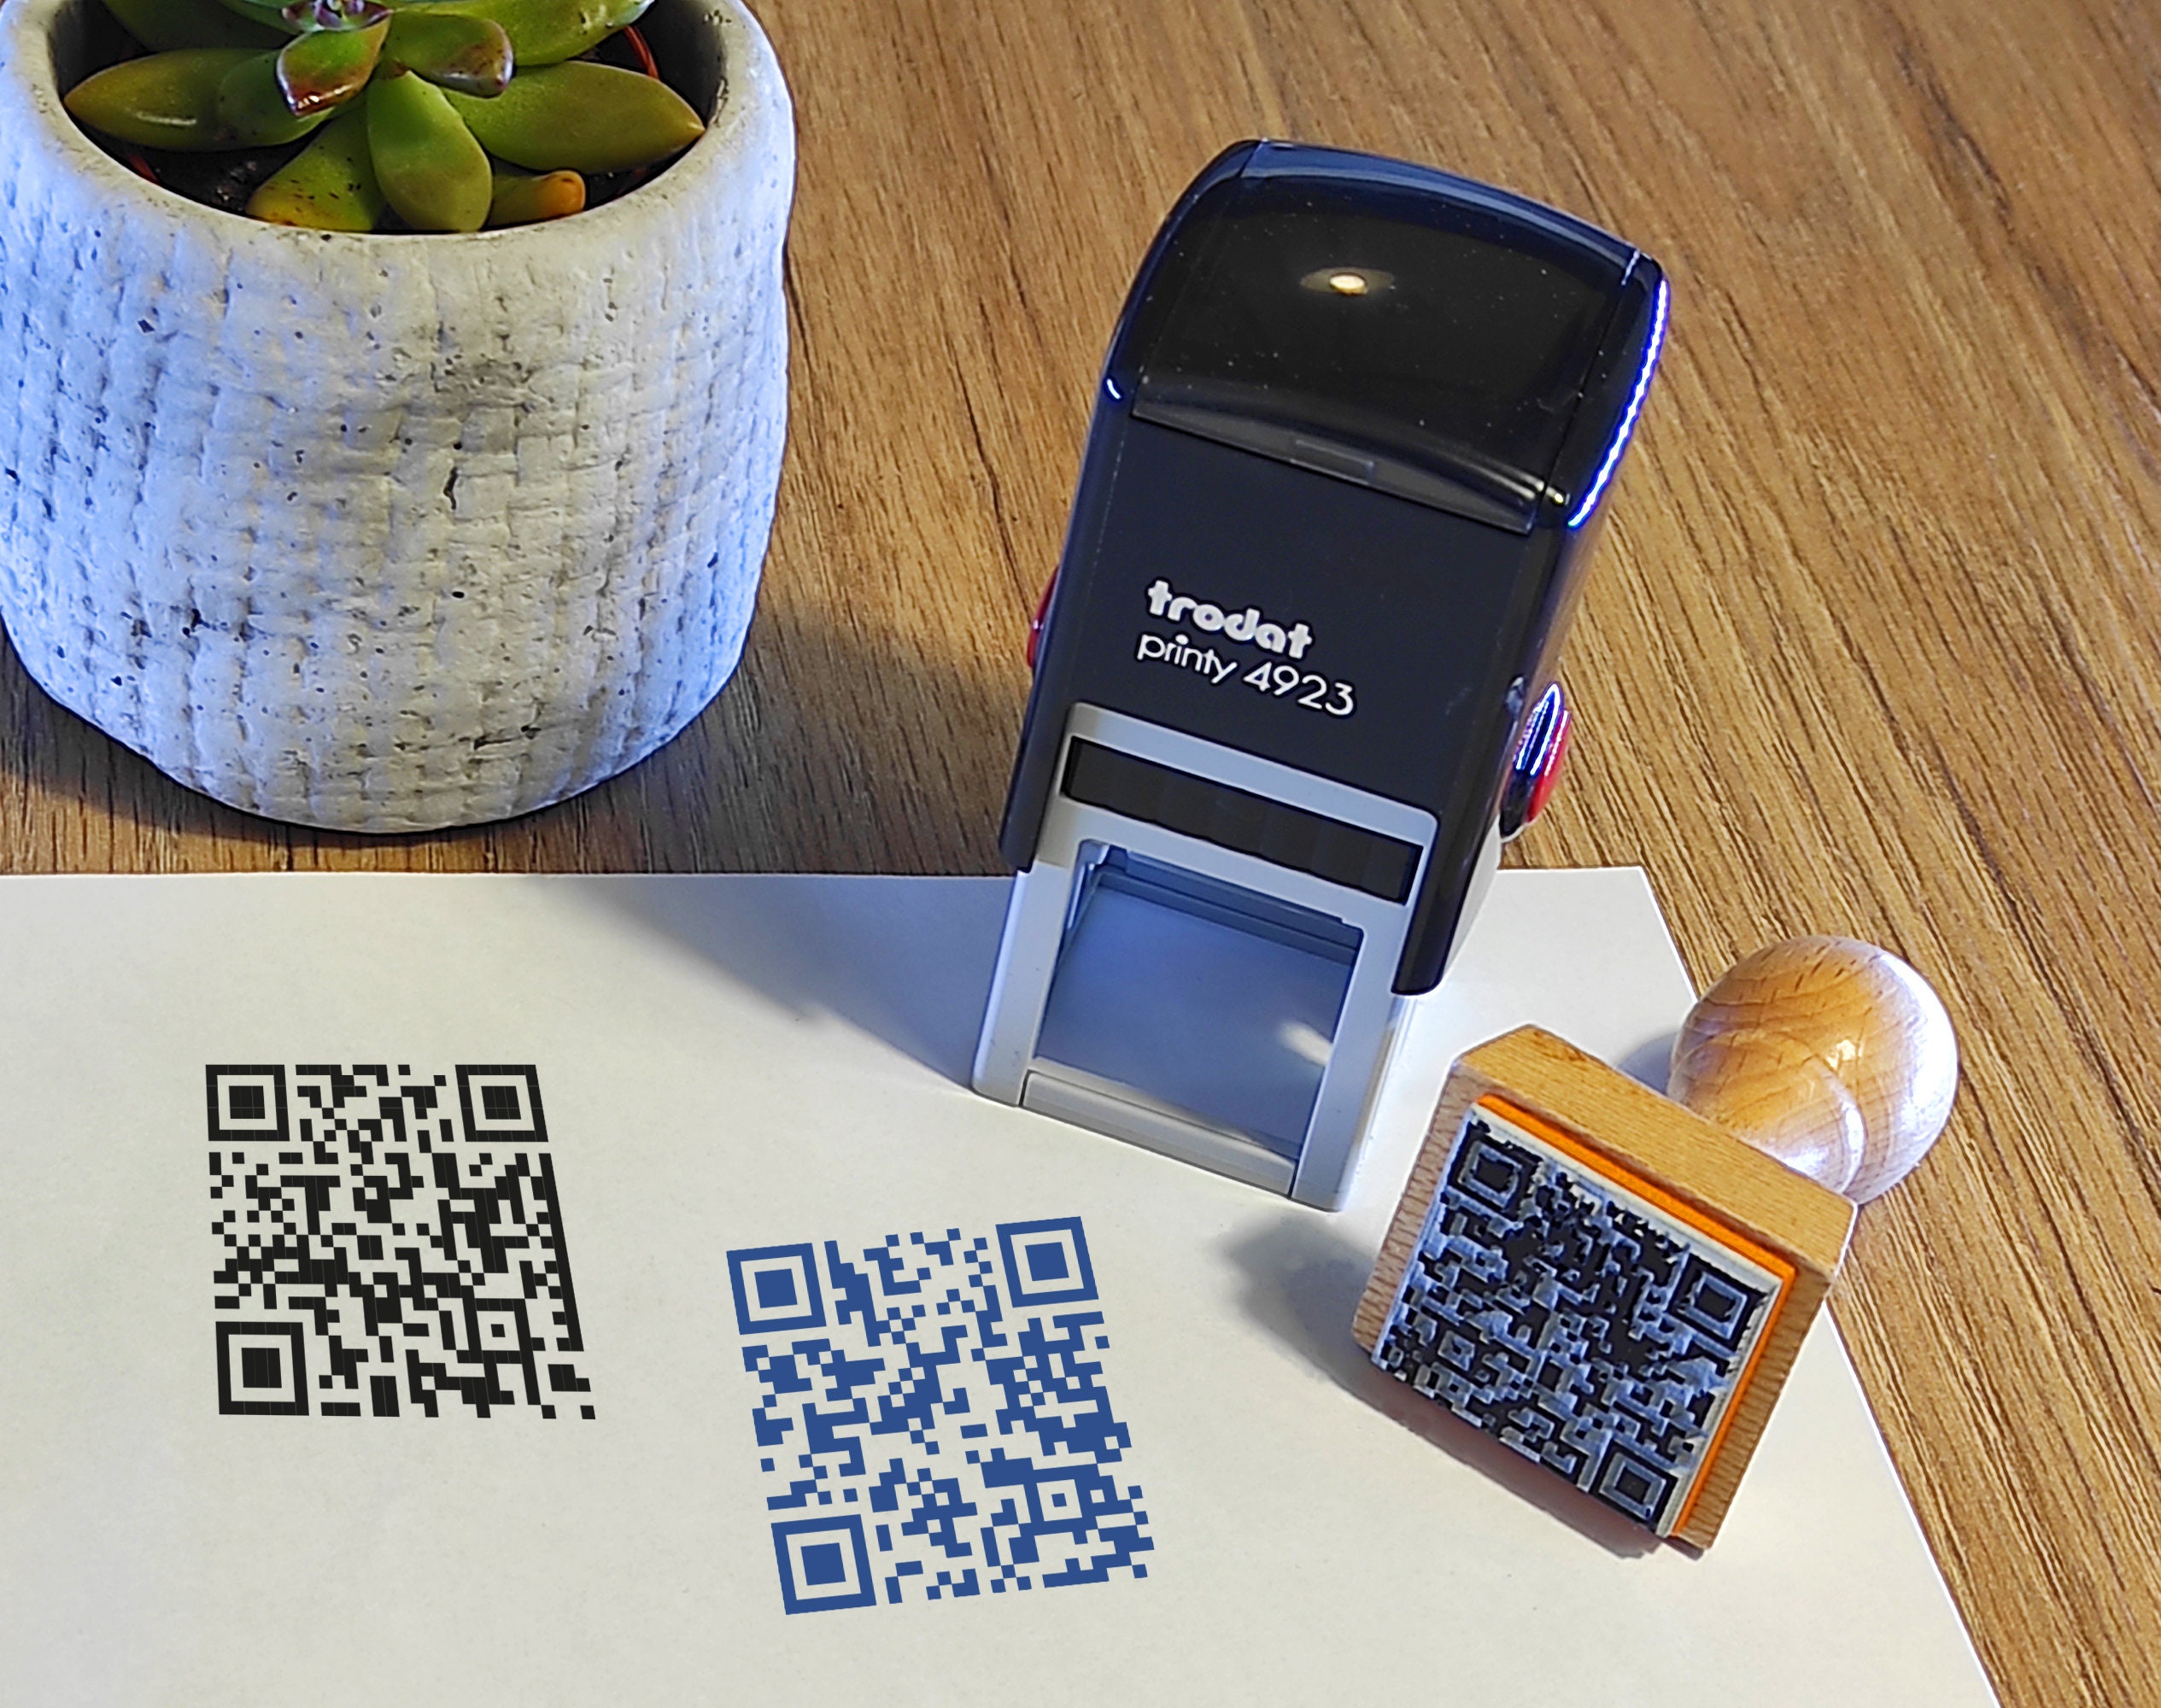 Business Branding Stamp QR Code Stamp Personalized Stamp Social Media Stamp  Instagram Stamp Business Packaging Supplies SELF INKING Stamp 